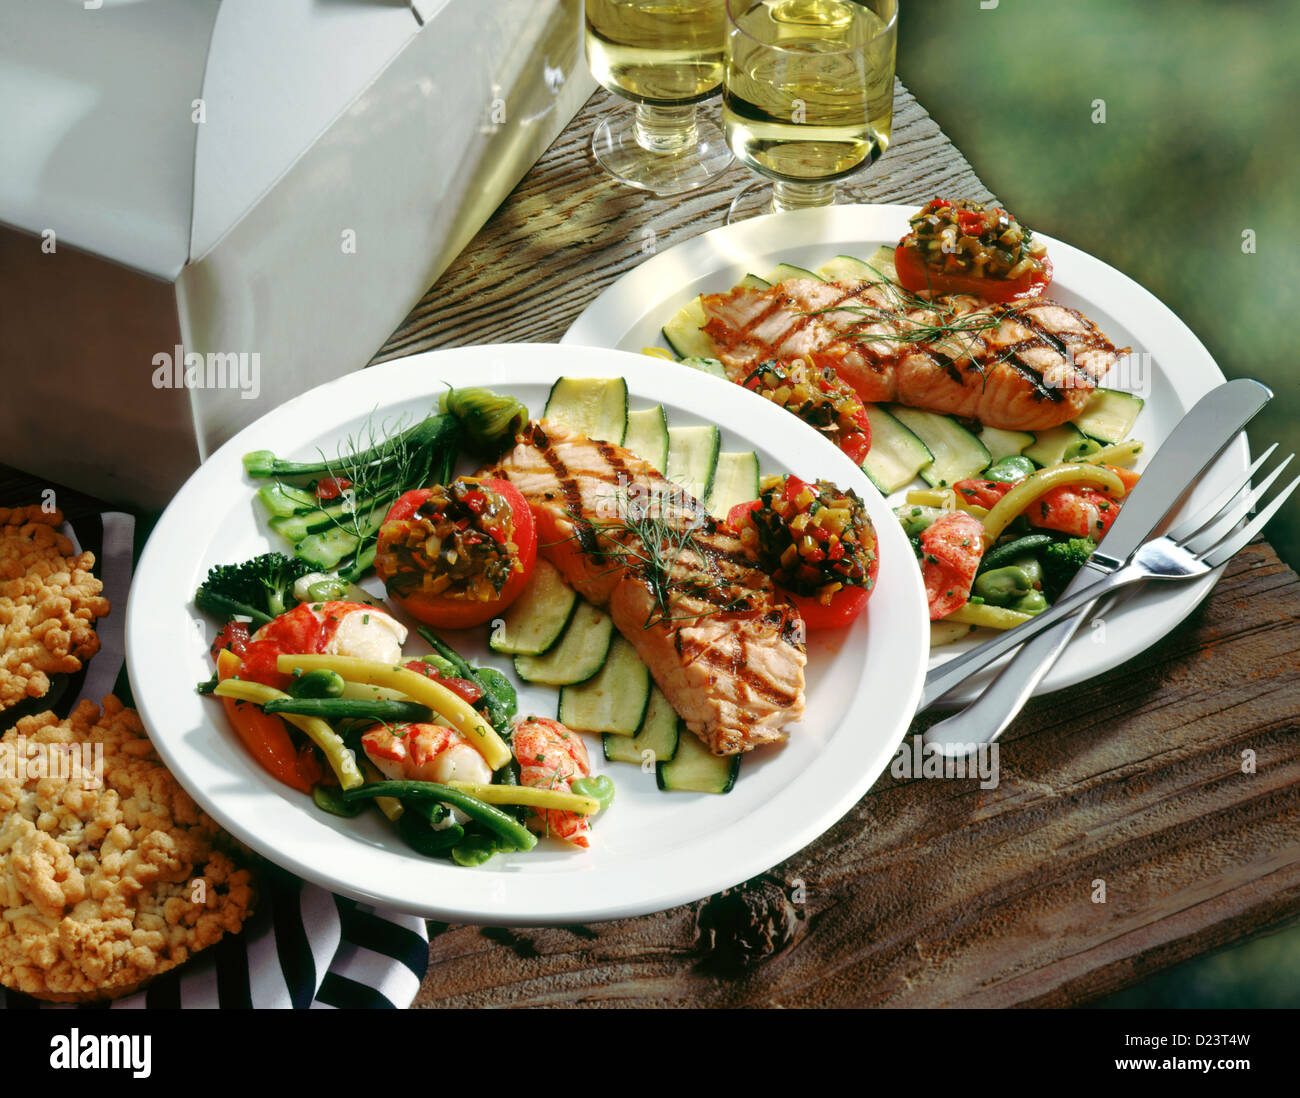 Grilled salmon picnic with white wine Stock Photo